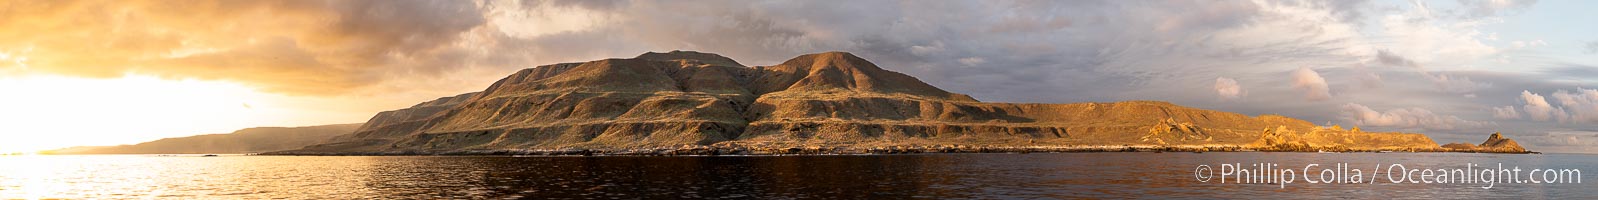 Sunset at San Clemente Island, south end showing Pyramid Head. Panoramic photo.